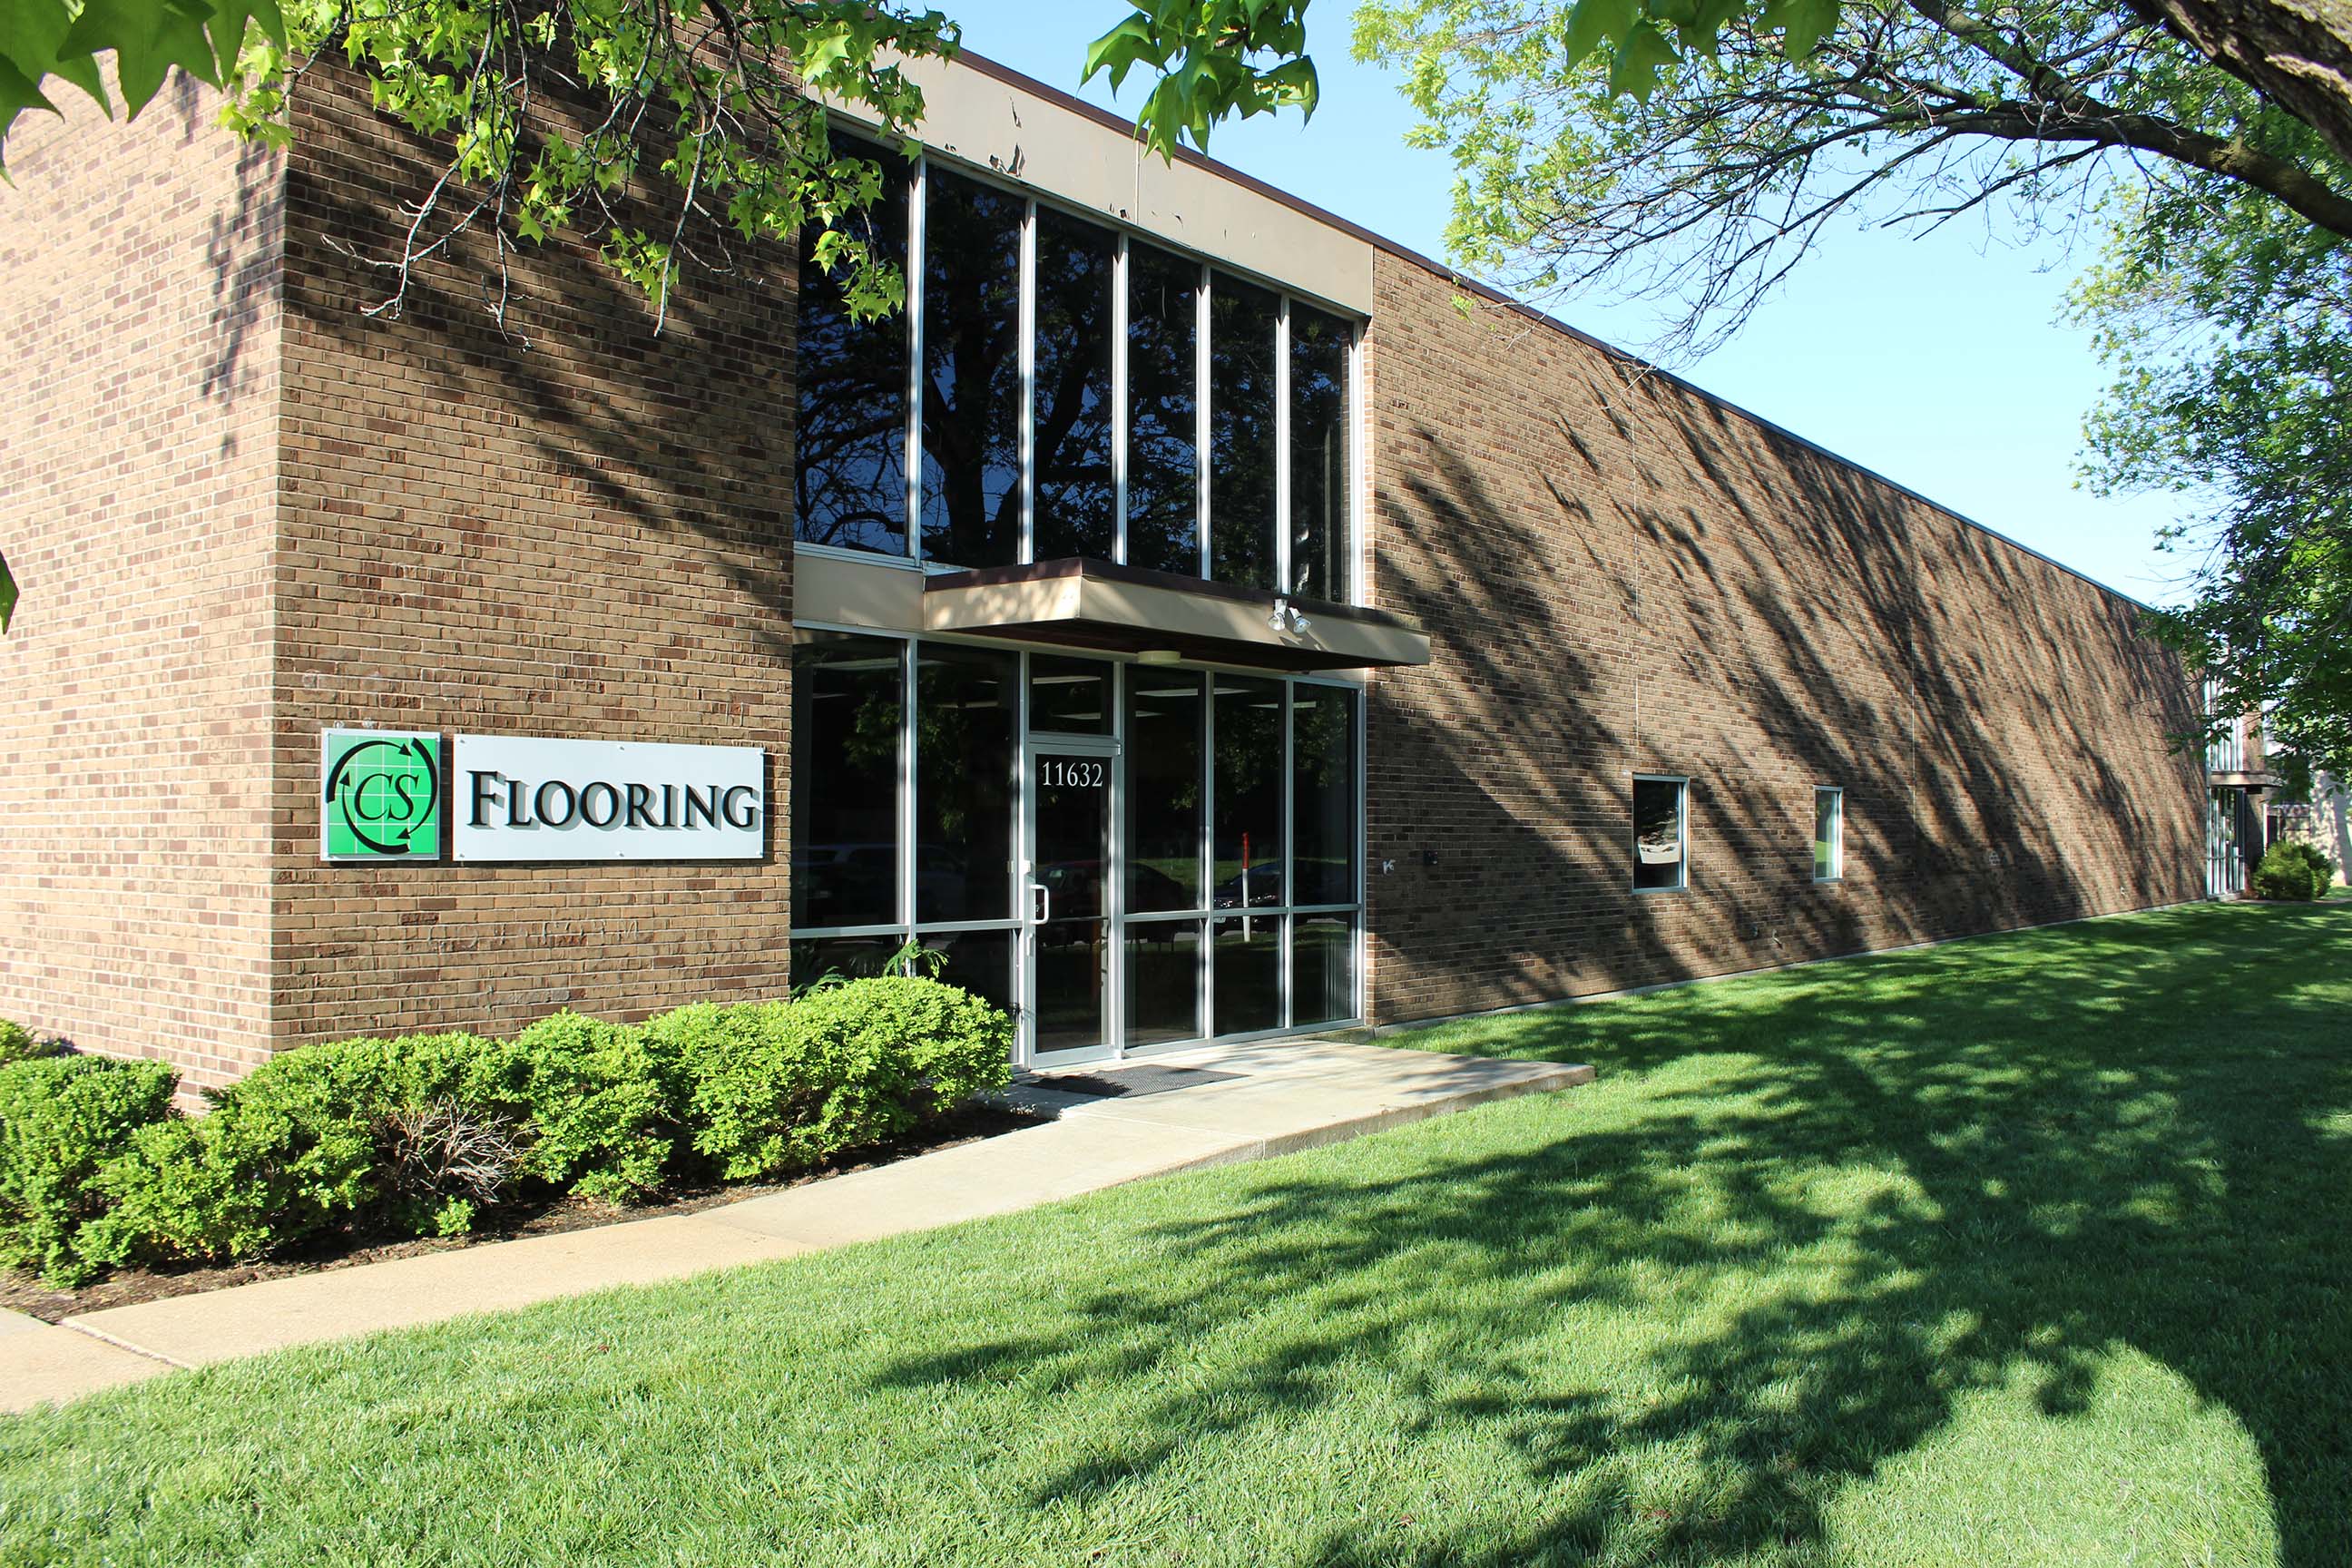 CS Flooring. the largest commercial flooring center in St. Louis